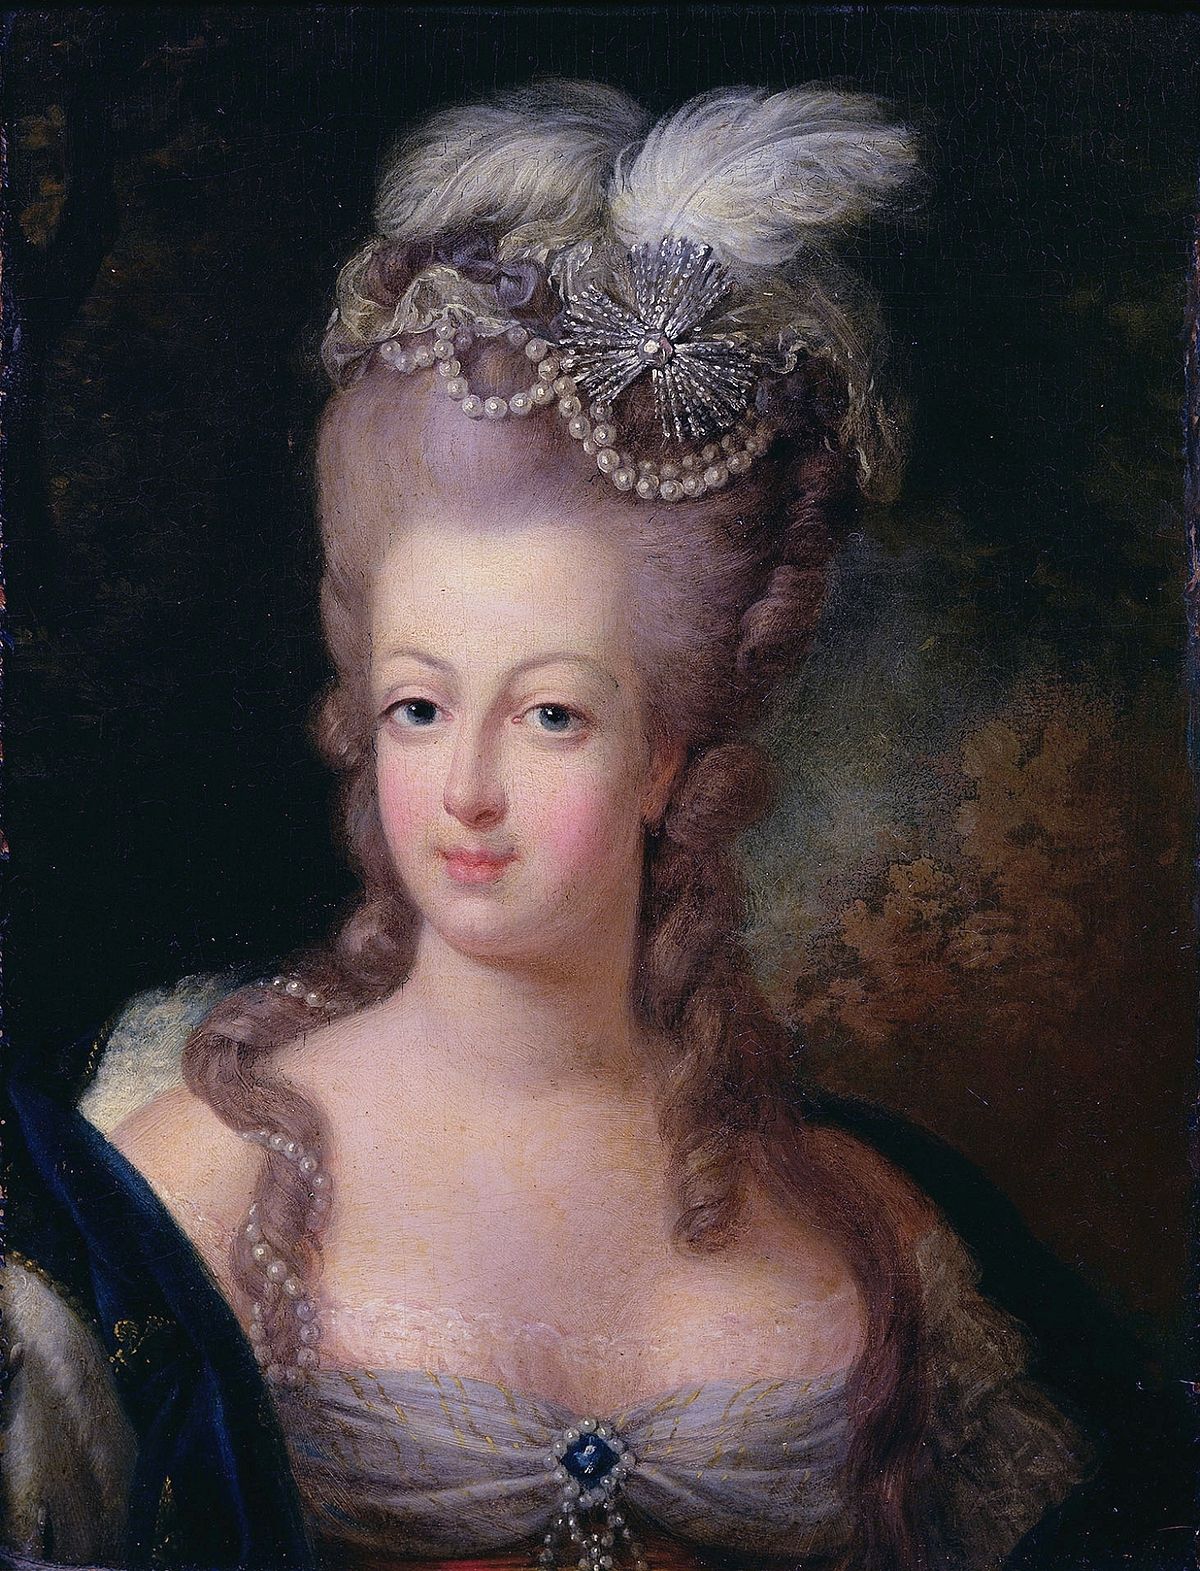 The dramatic wedding of Marie-Antoinette